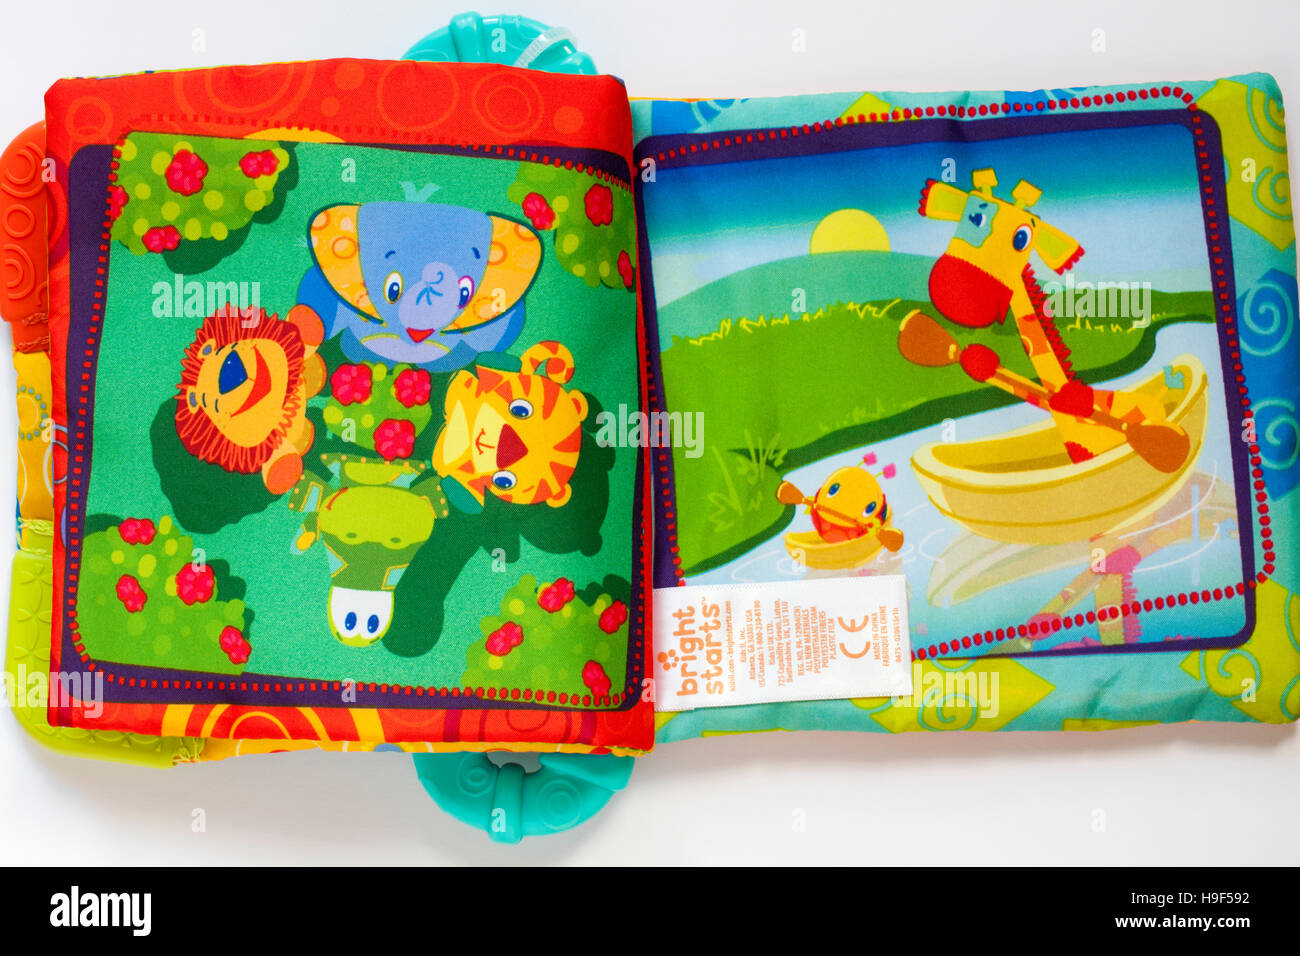 Label in Bright Starts in Teethe and Read fabric book for baby made in China - sold in the UK United Kingdom, Great Britain Stock Photo